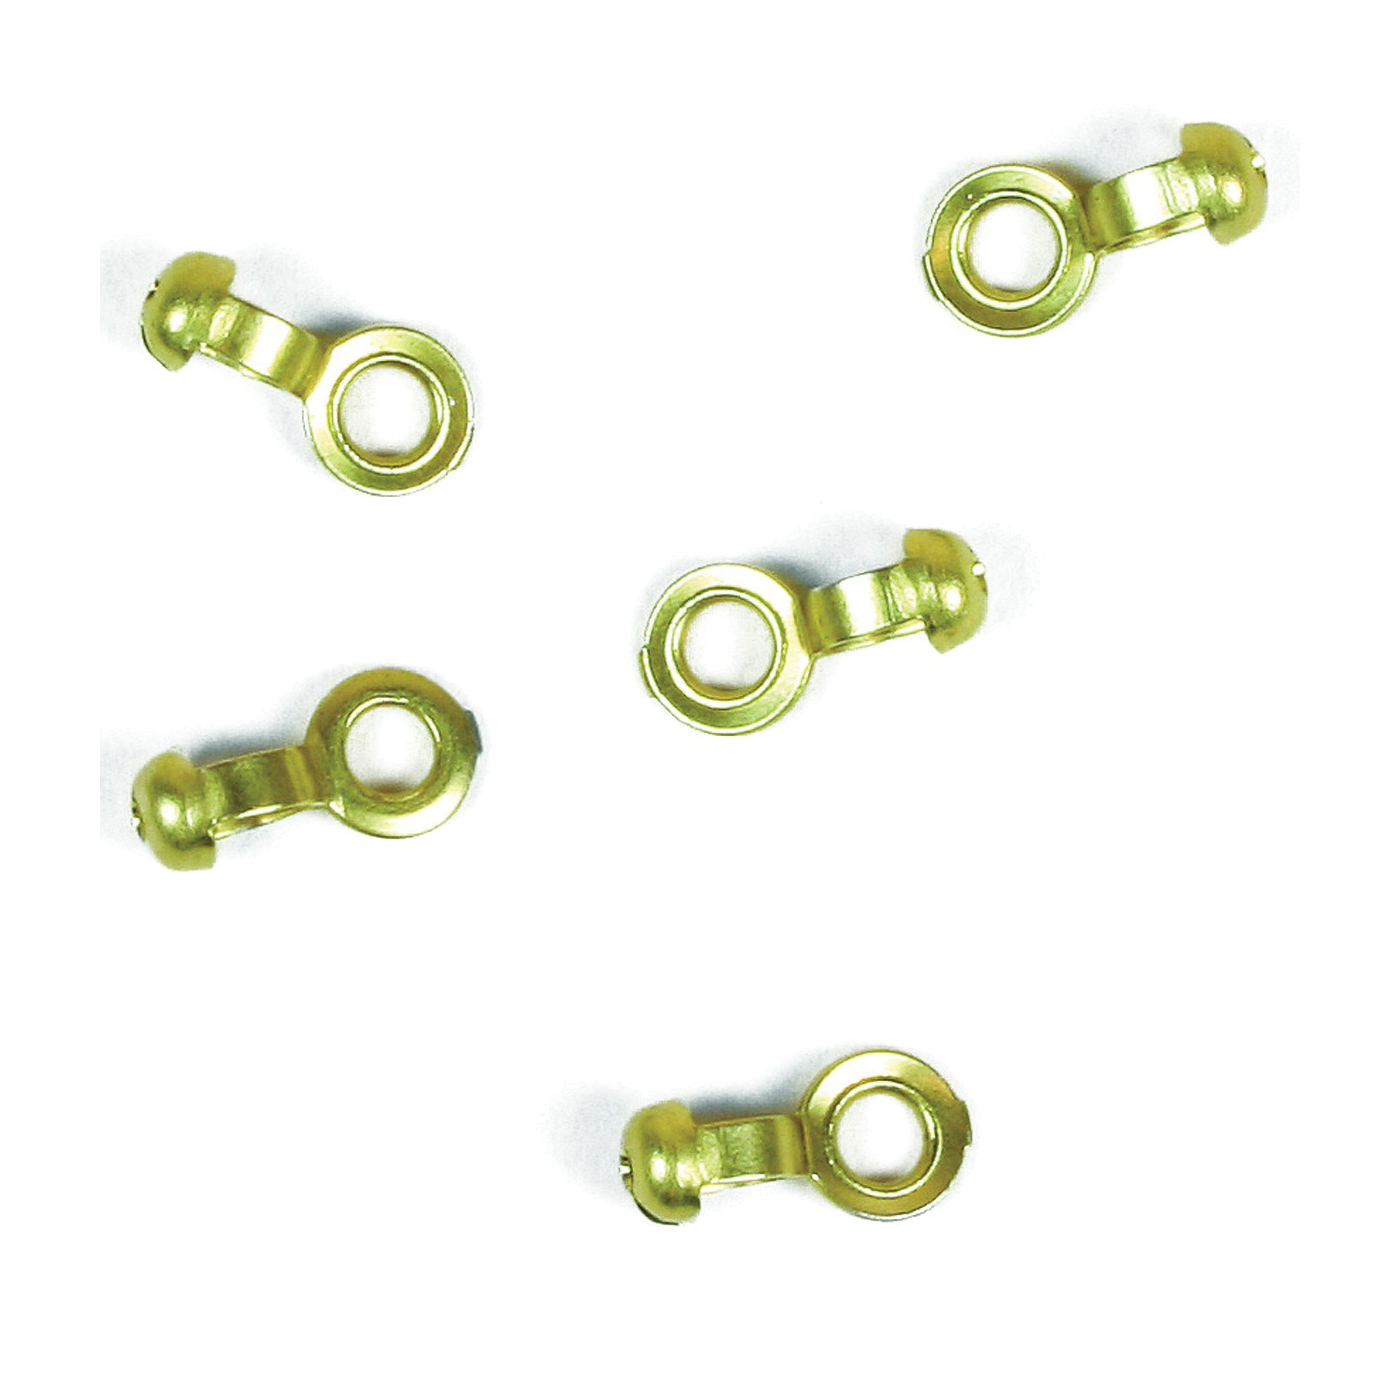 60356 Pull Chain Coupling, #6 Chain, Brass